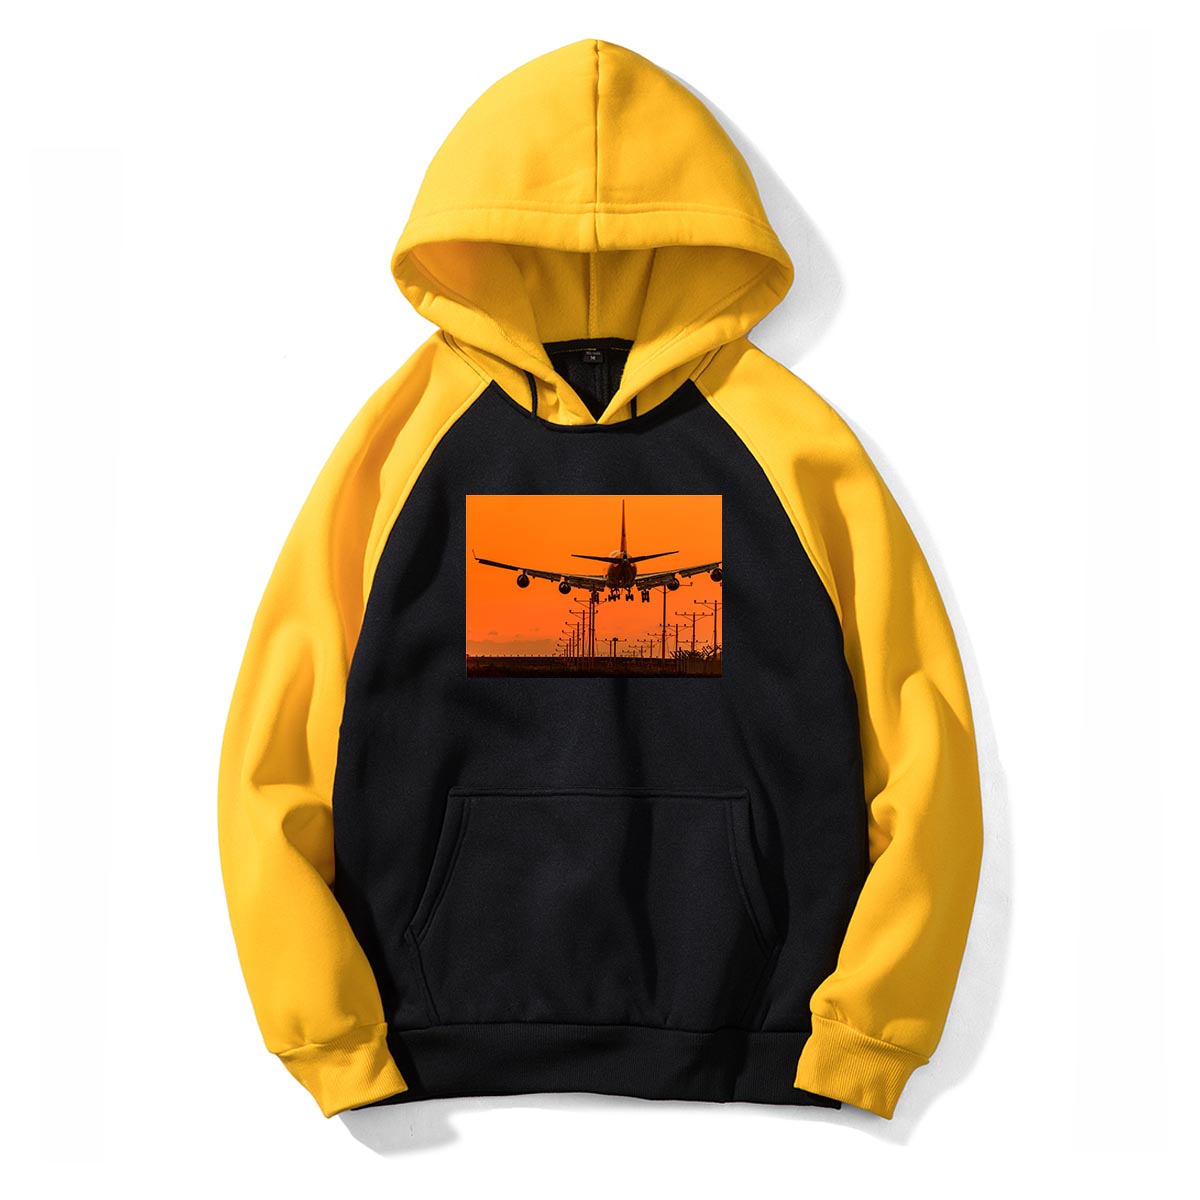 Close up to Boeing 747 Landing at Sunset Designed Colourful Hoodies